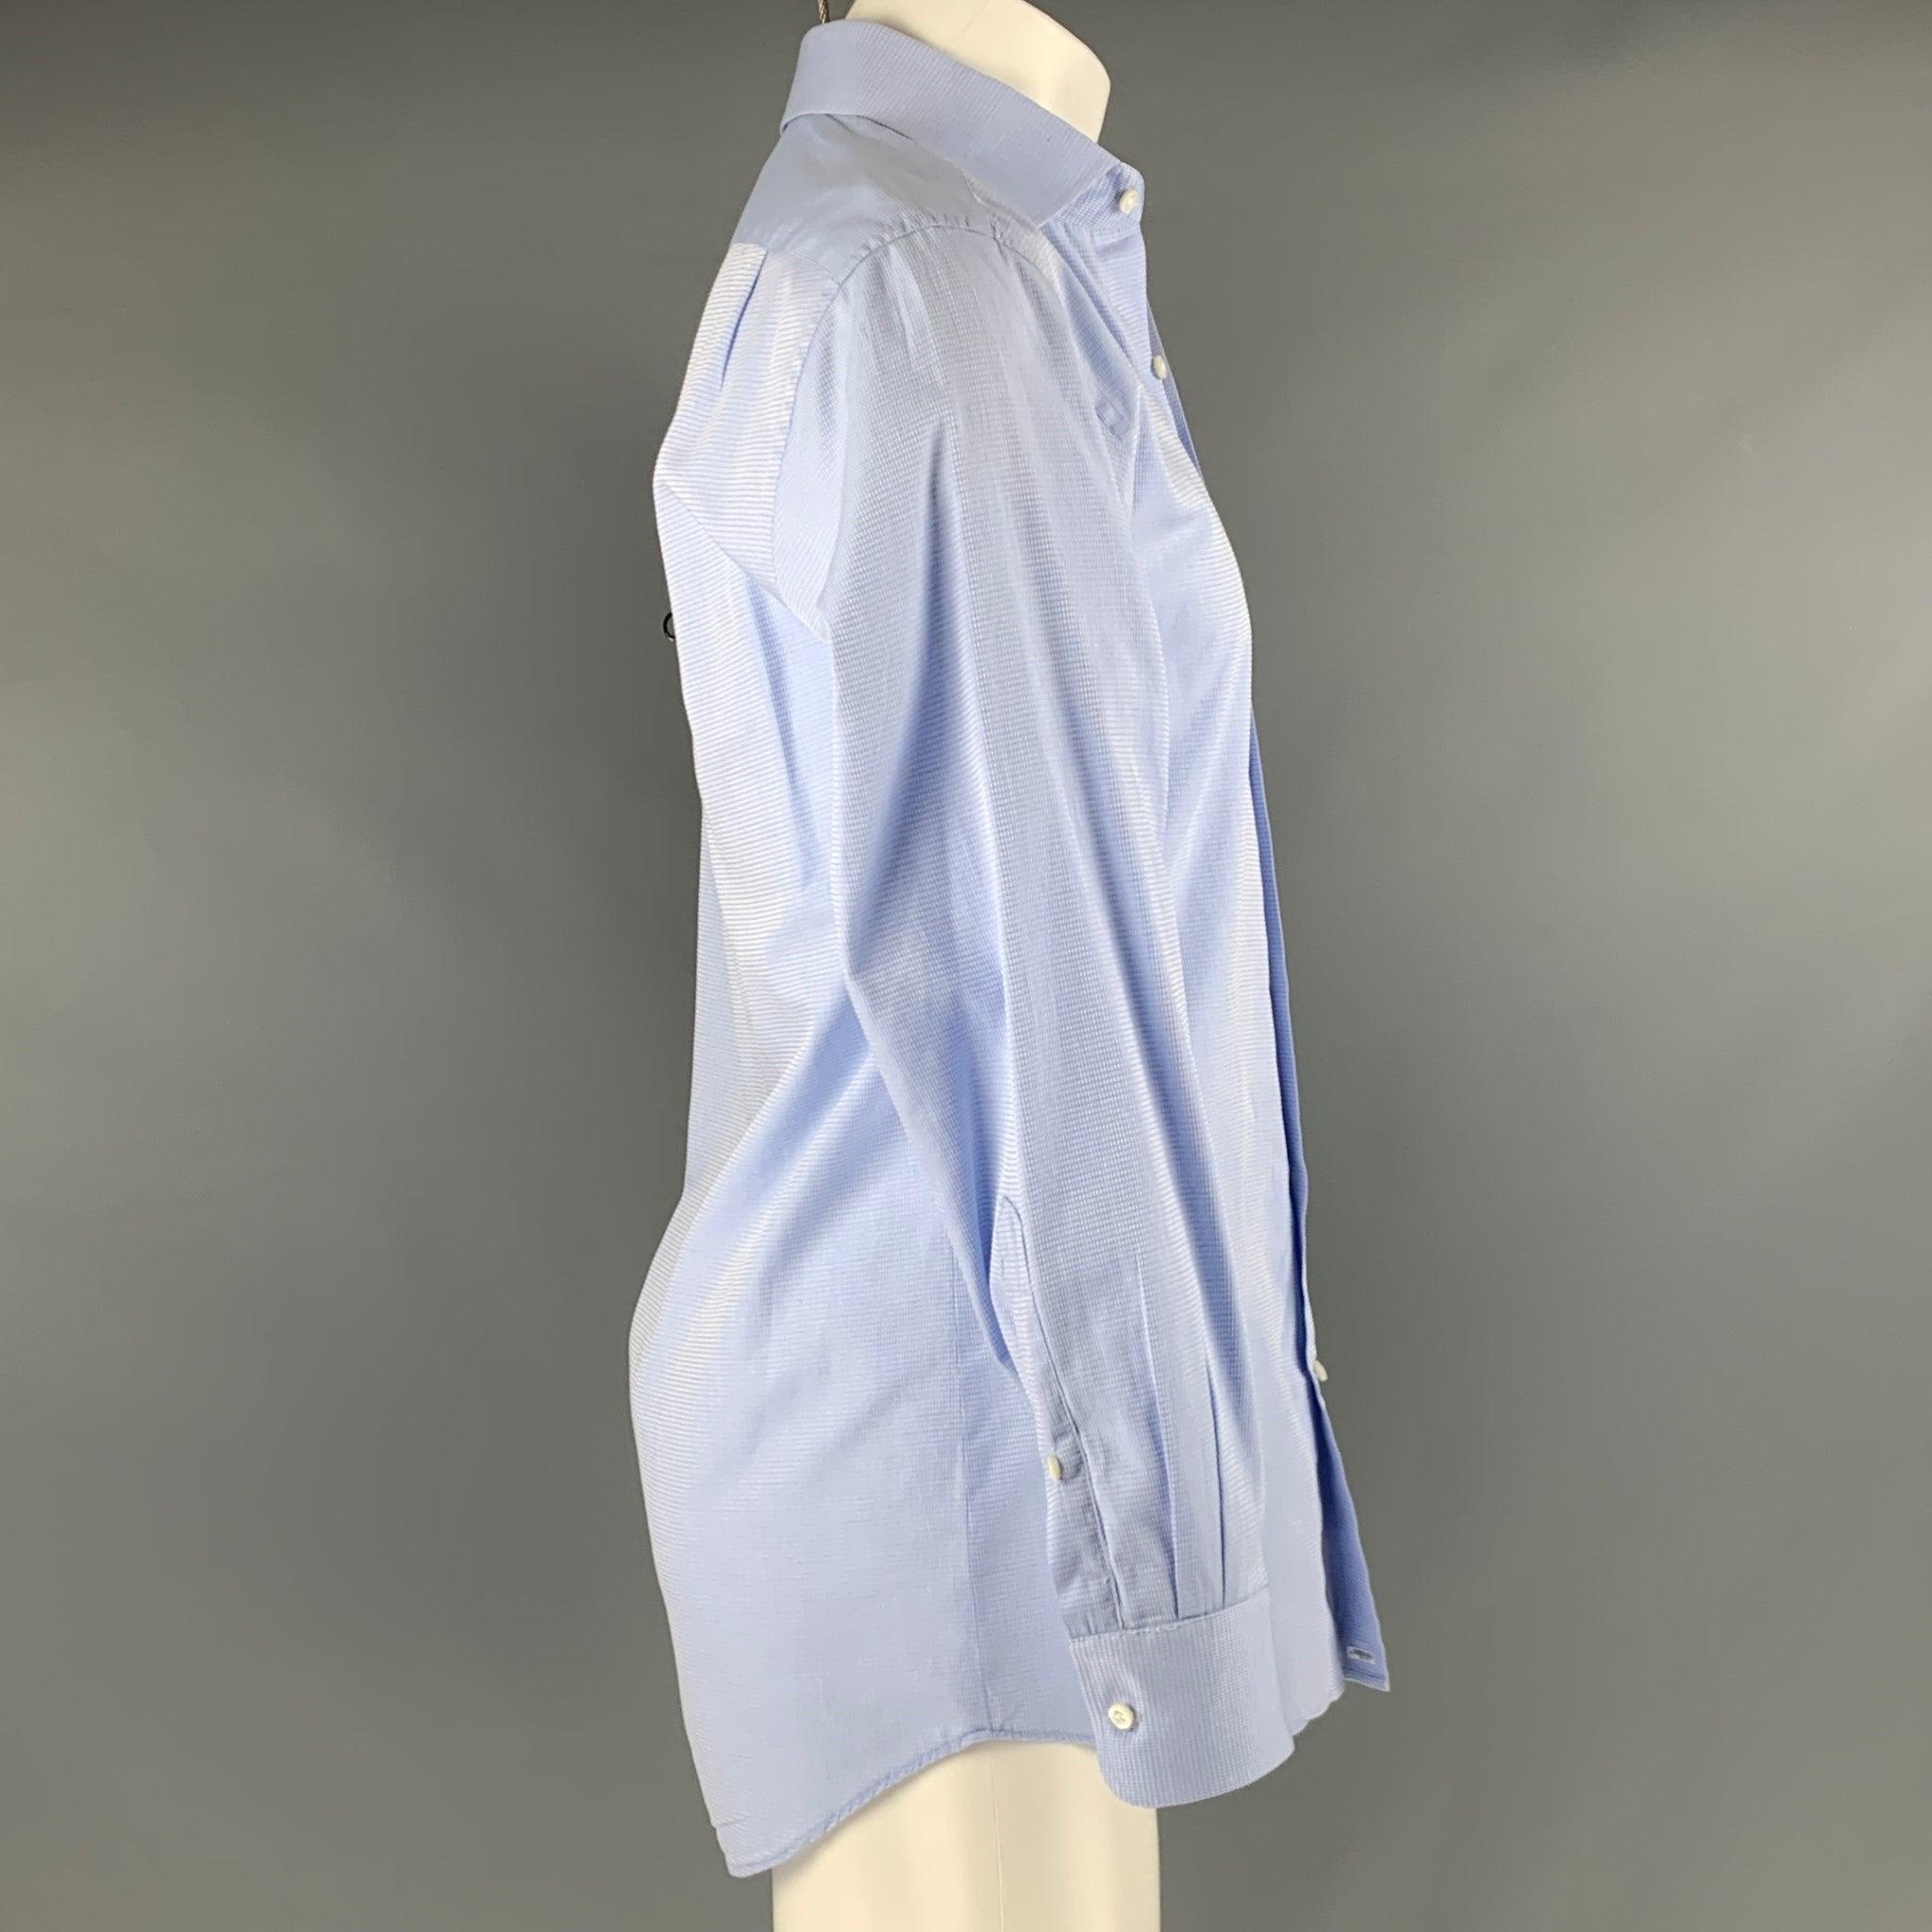 PURPLE LABEL by RALPH LAUREN long sleeve shirt in a blue cotton featuring textured look, spread collar, and button closure. Made in Italy.Very Good Pre-Owned Condition. Minor signs of wear. 

Marked:   16 

Measurements: 
 
Shoulder: 18 inches